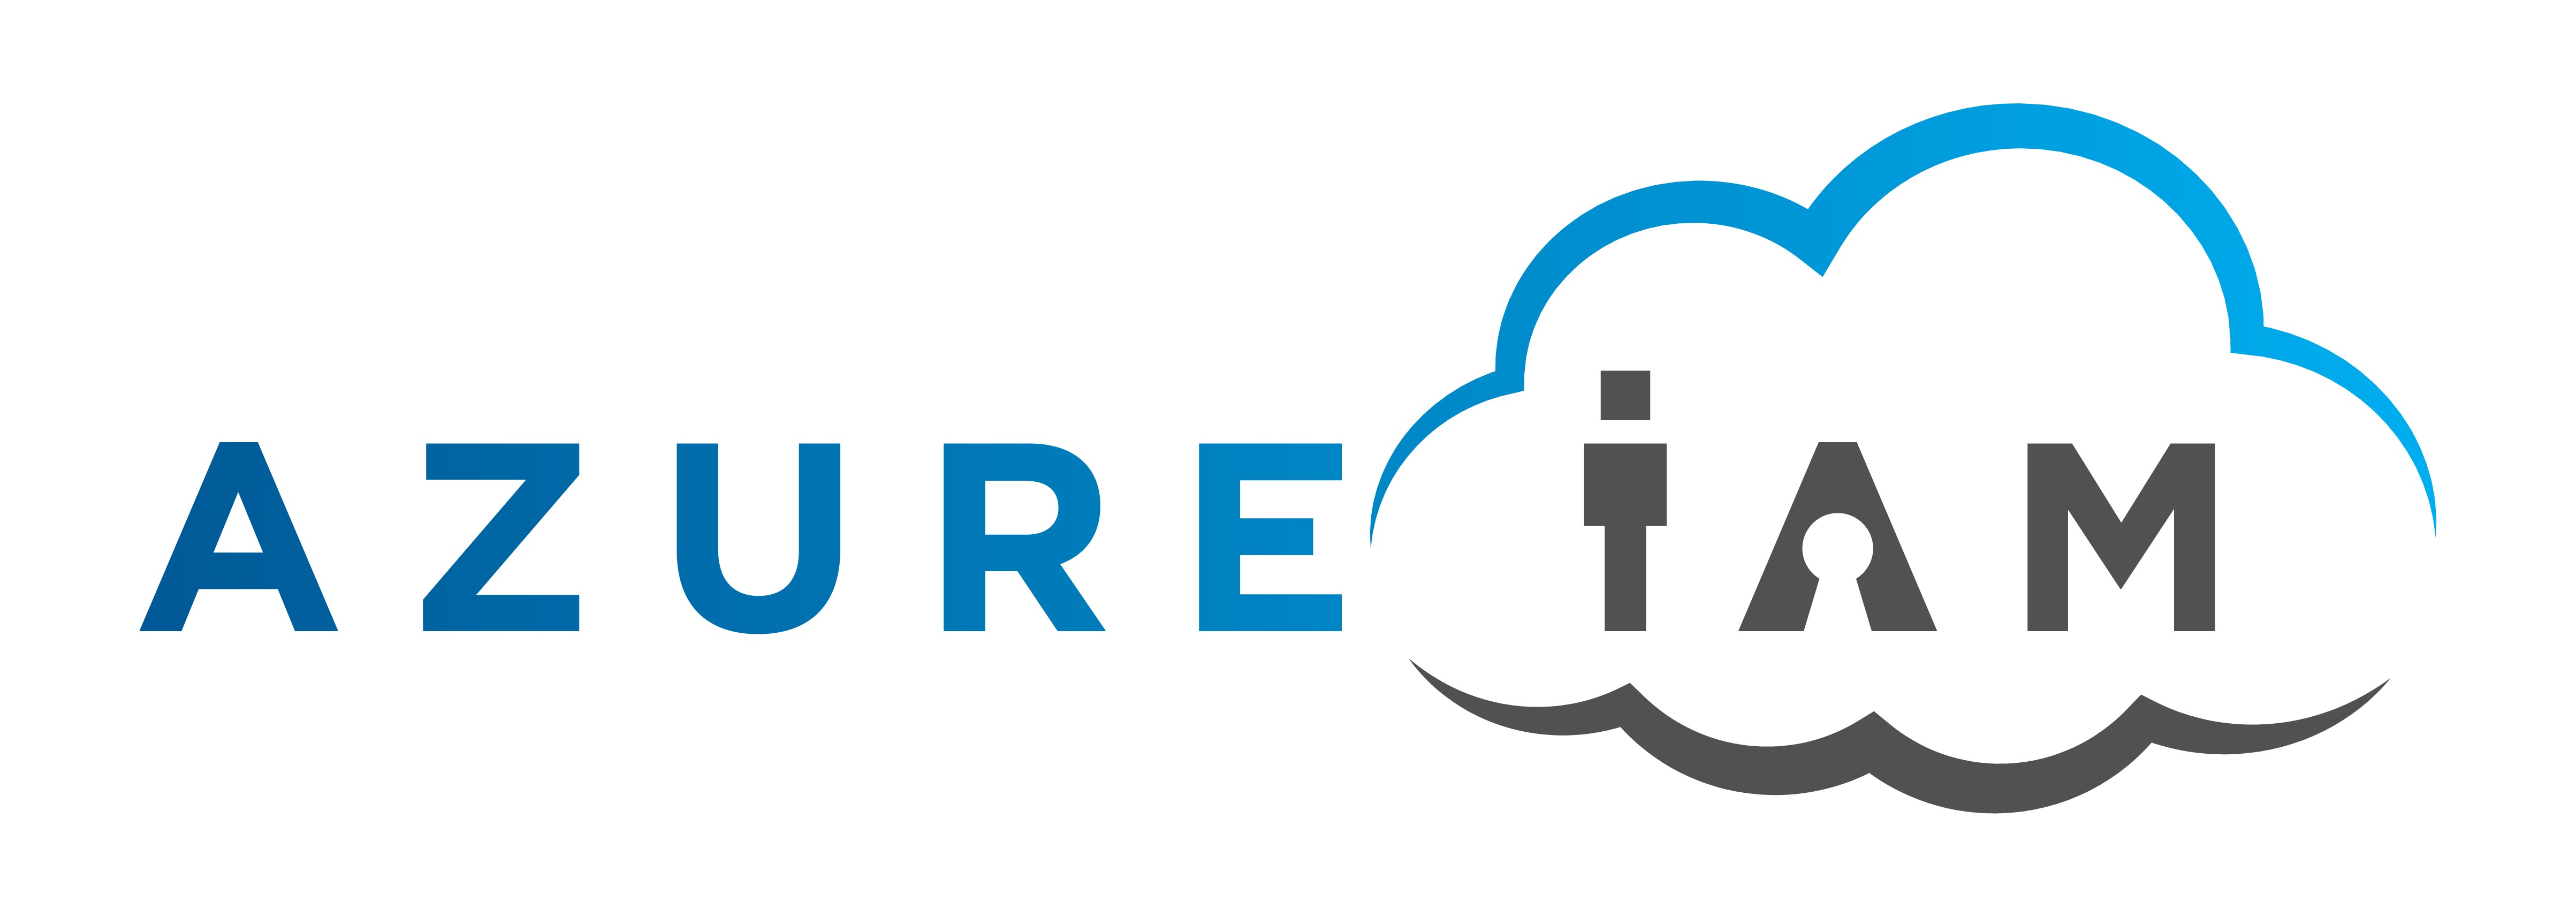 Get Custom On-Premise & Cloud Security Systems From Expert Microsoft Partner